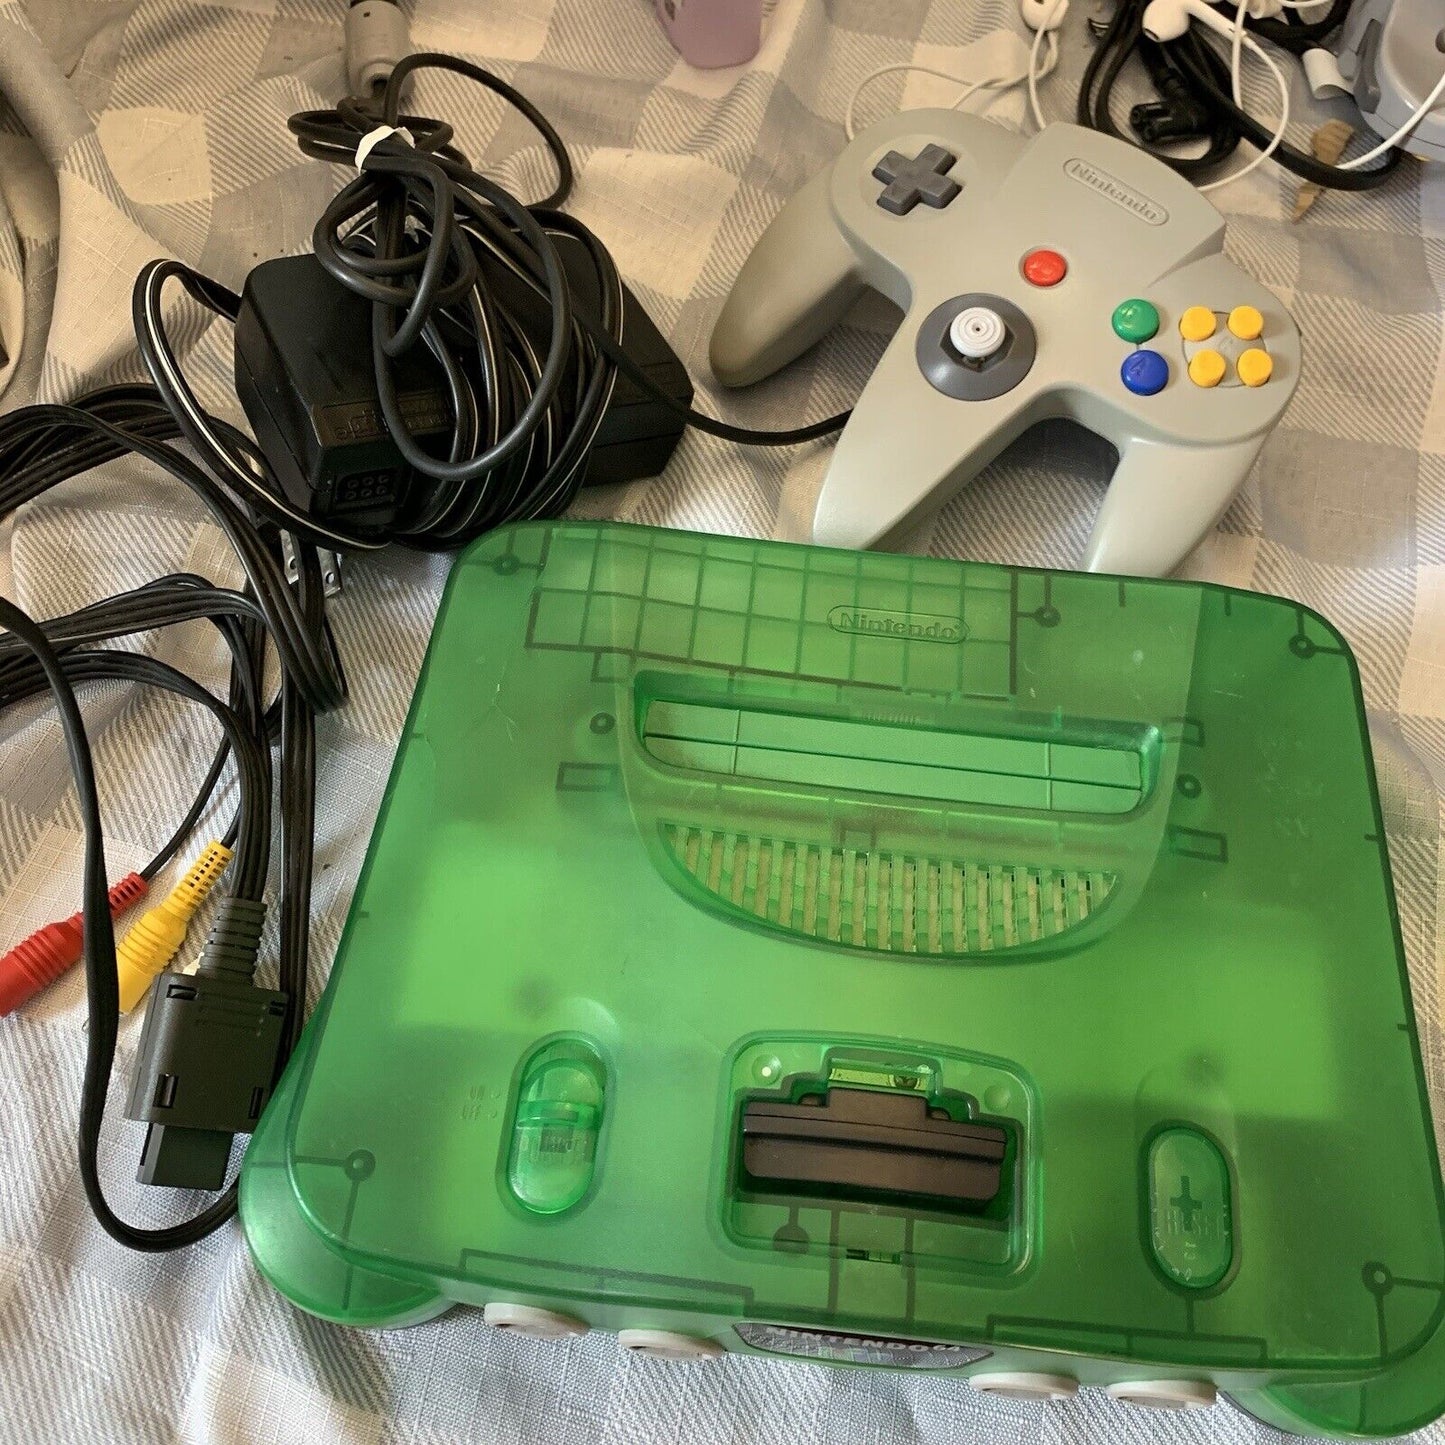 N64 Nintendo 64 Funtastic Jungle Green Console, Controller USA Authentic/Tested.